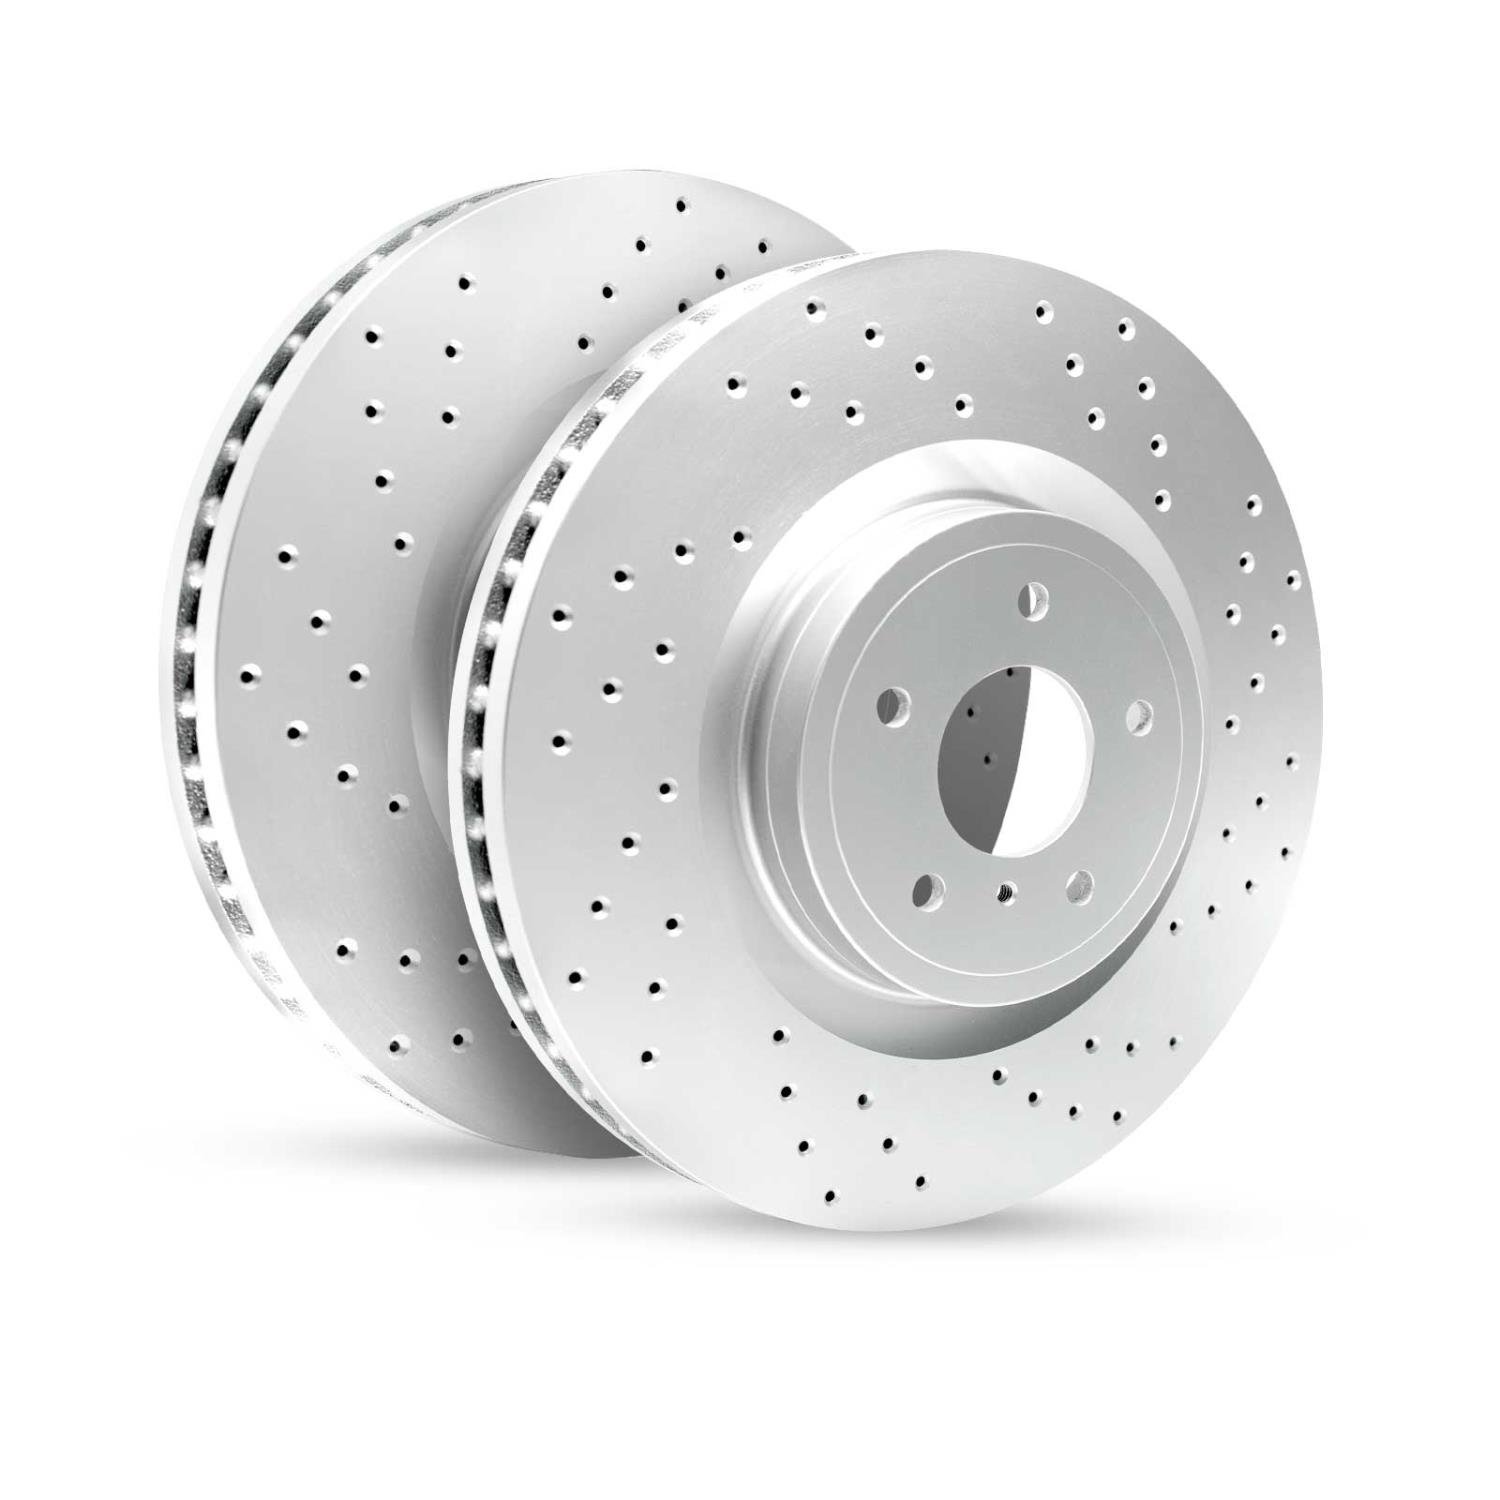 GEO-Carbon Drilled/Slotted Rotors, 2005-2007 Land Rover,